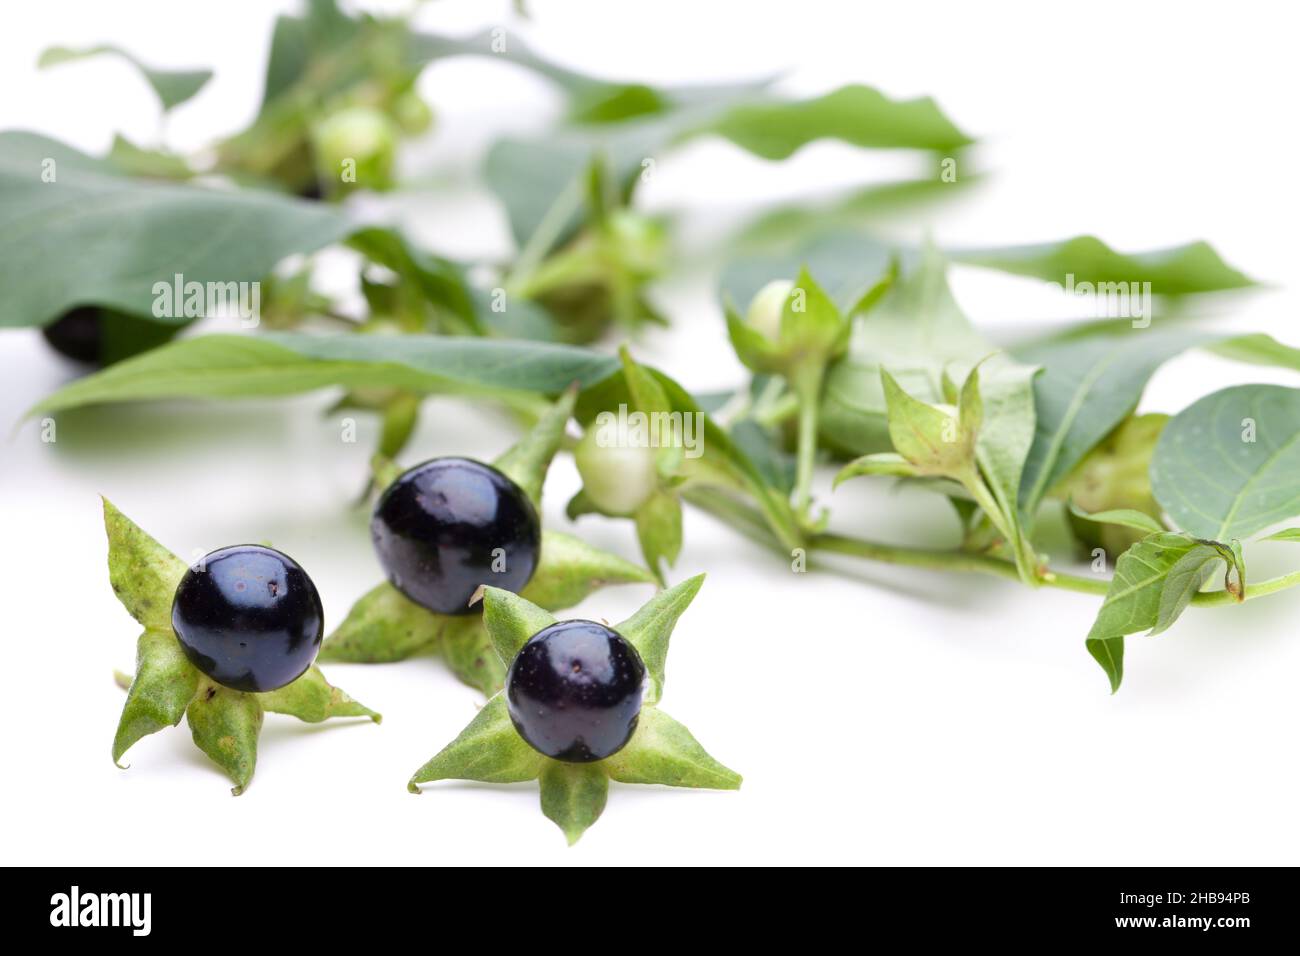 Plant, belladonna, black, berries, leaves, poisonous herbs, magic, plants, witches ointment, poison, health, road, green, berry, cure, medicinal herb, Stock Photo